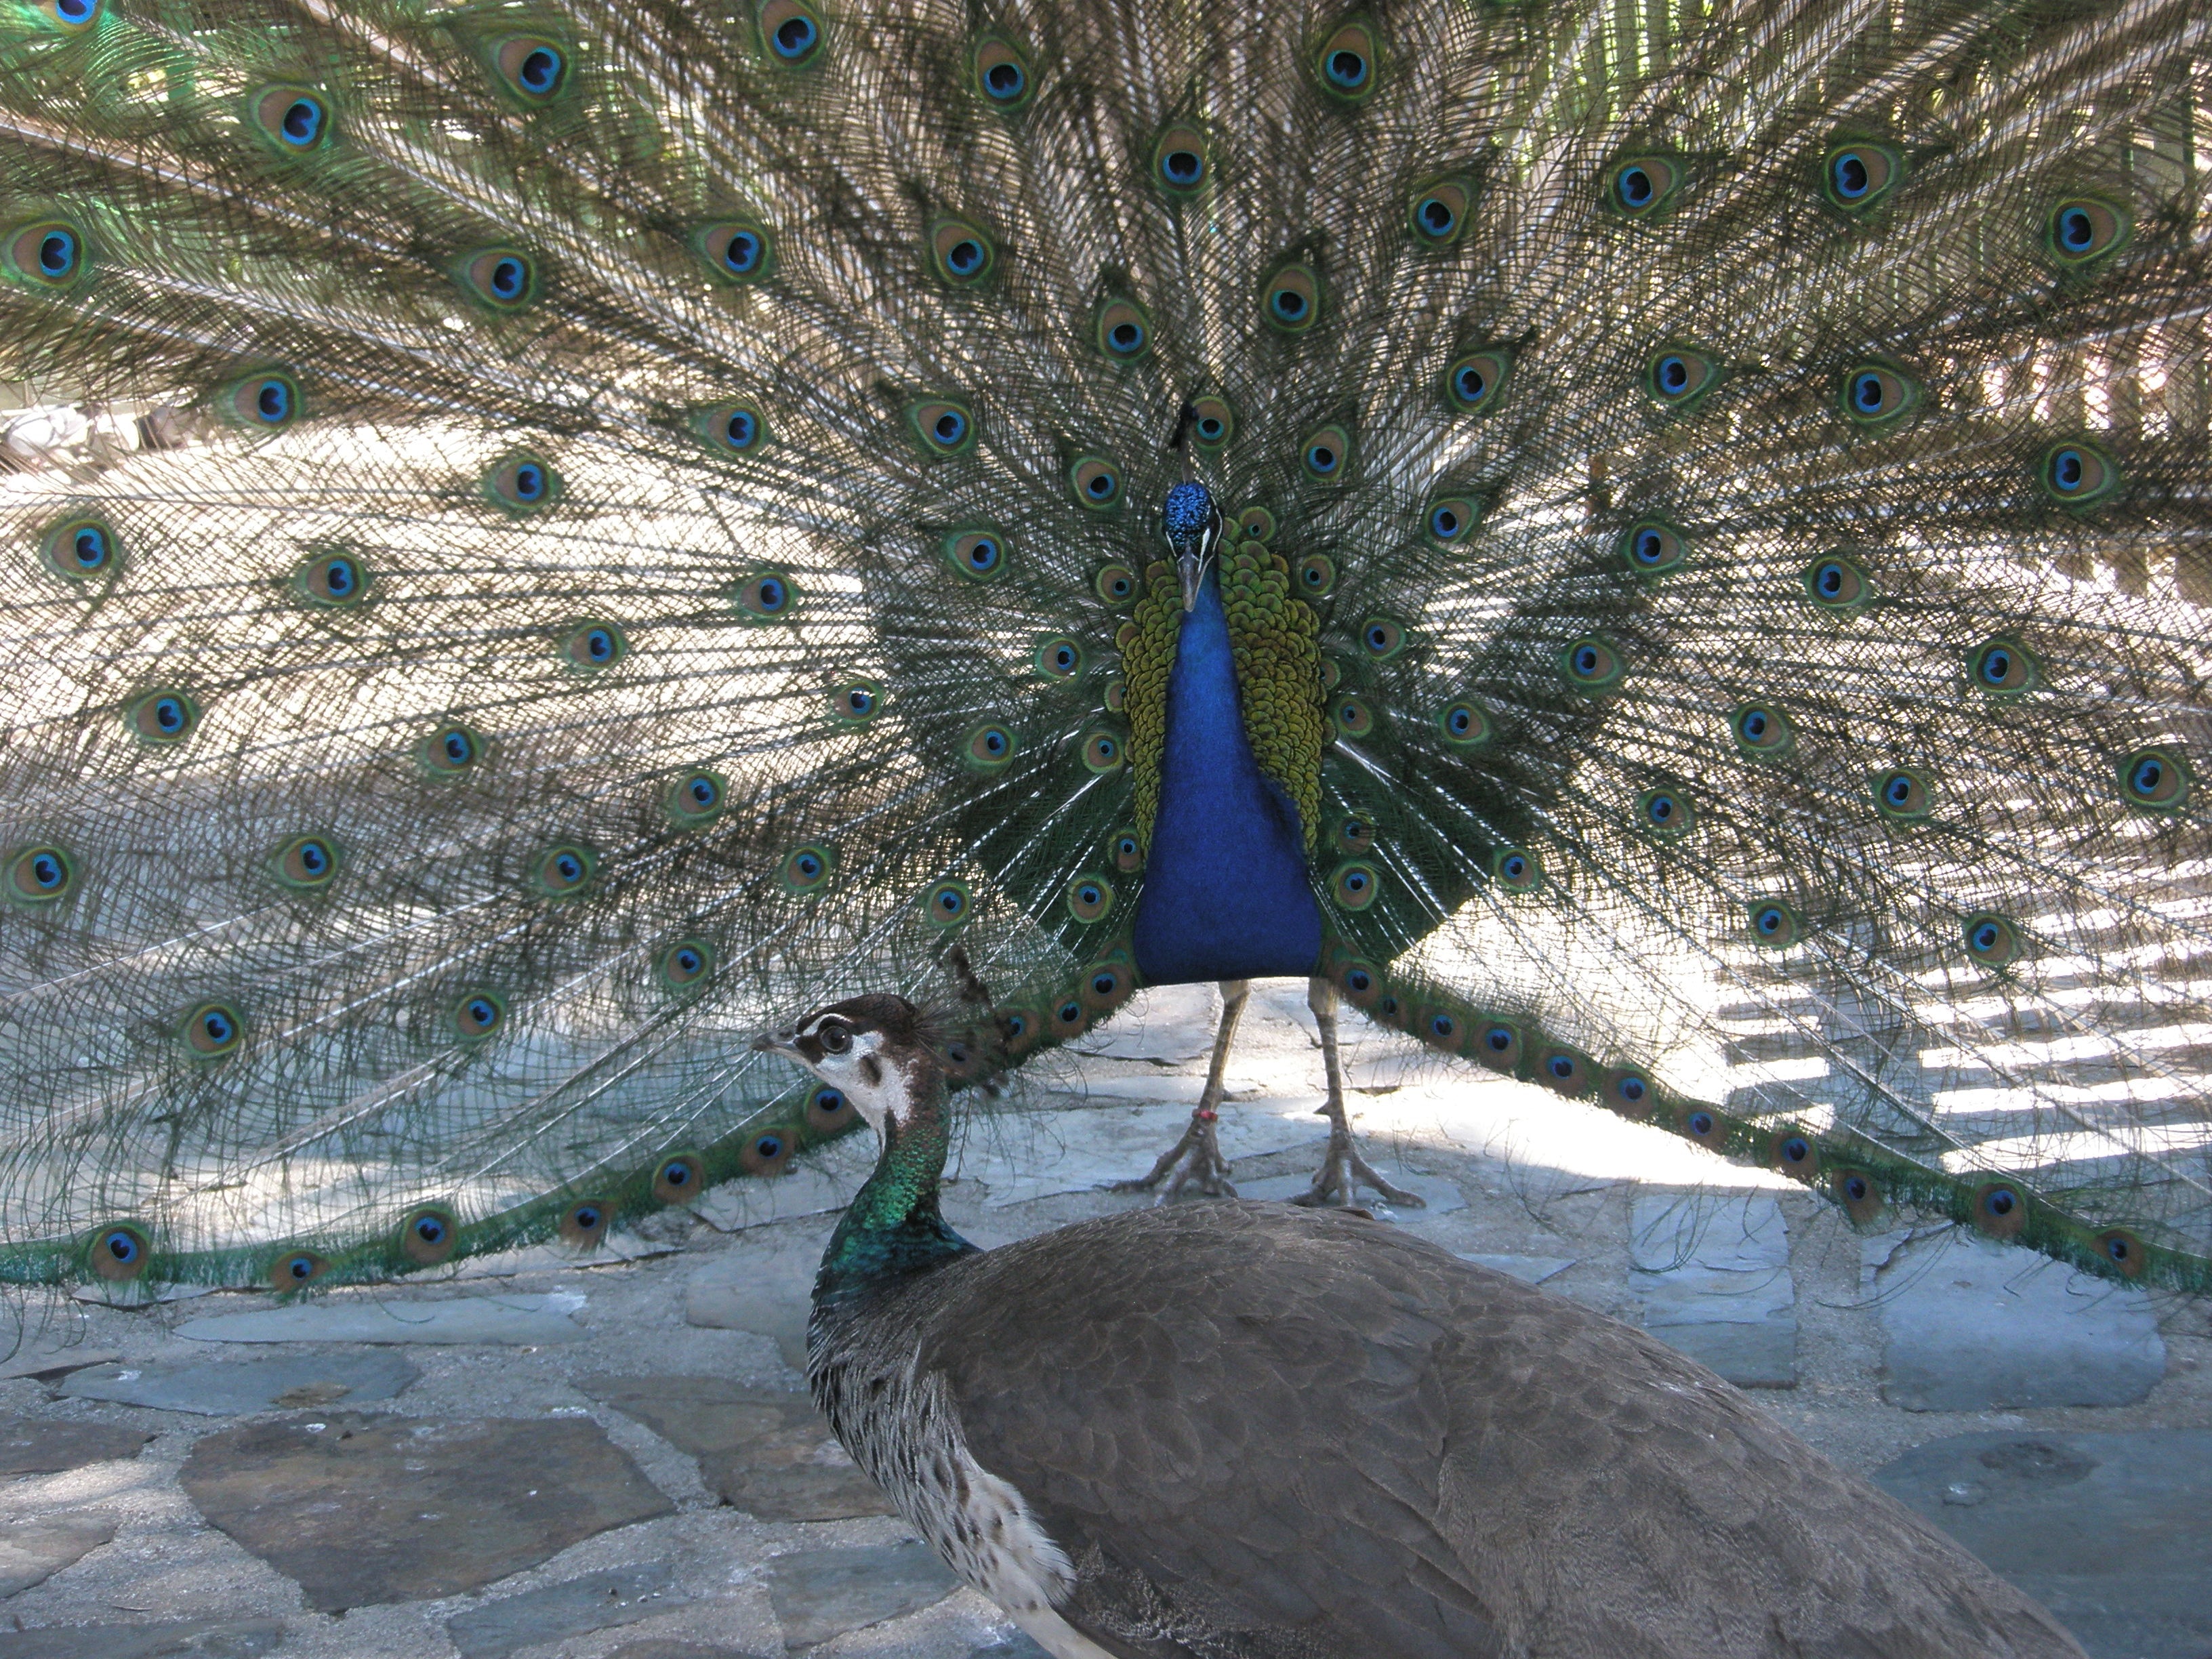 blue green and yellow peacock showing its tail